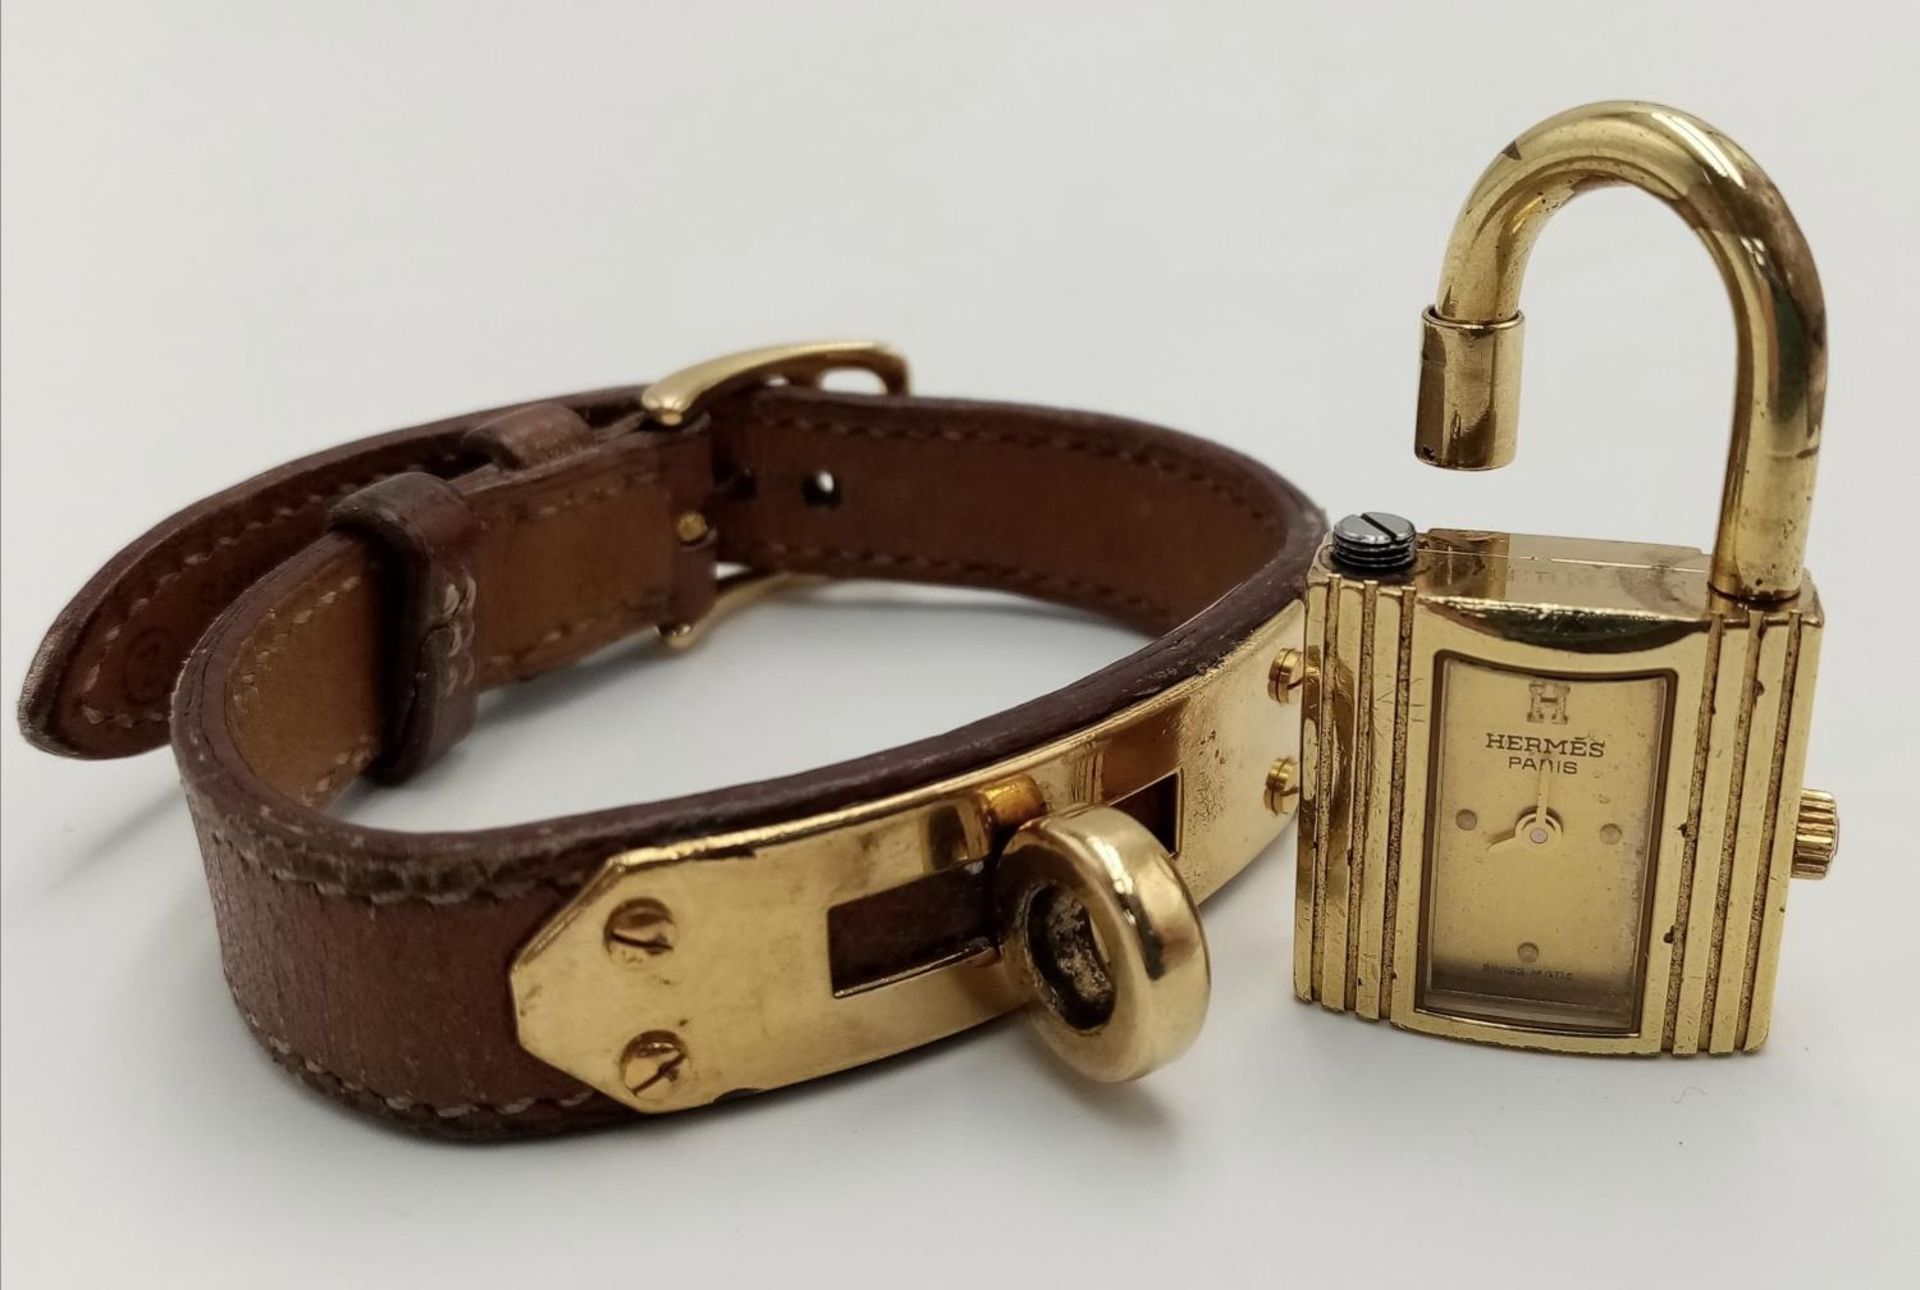 A Hermes Kelly Watch. Brown leather strap. Gold plated padlock quartz watch. Needs a battery so as - Image 4 of 7